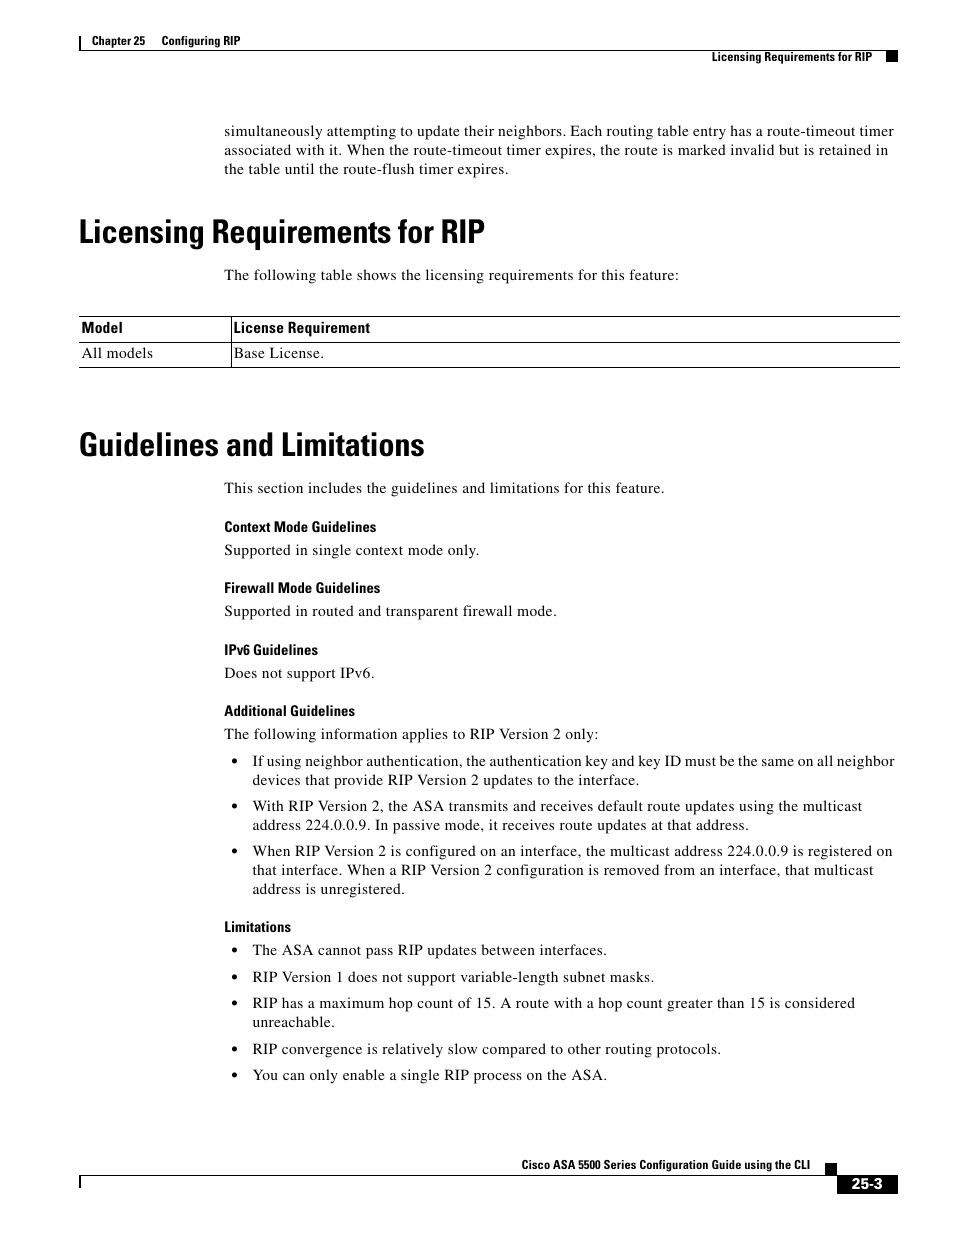 Licensing requirements for rip, Guidelines and limitations | Cisco ASA 5505 User Manual | Page 483 / 1994